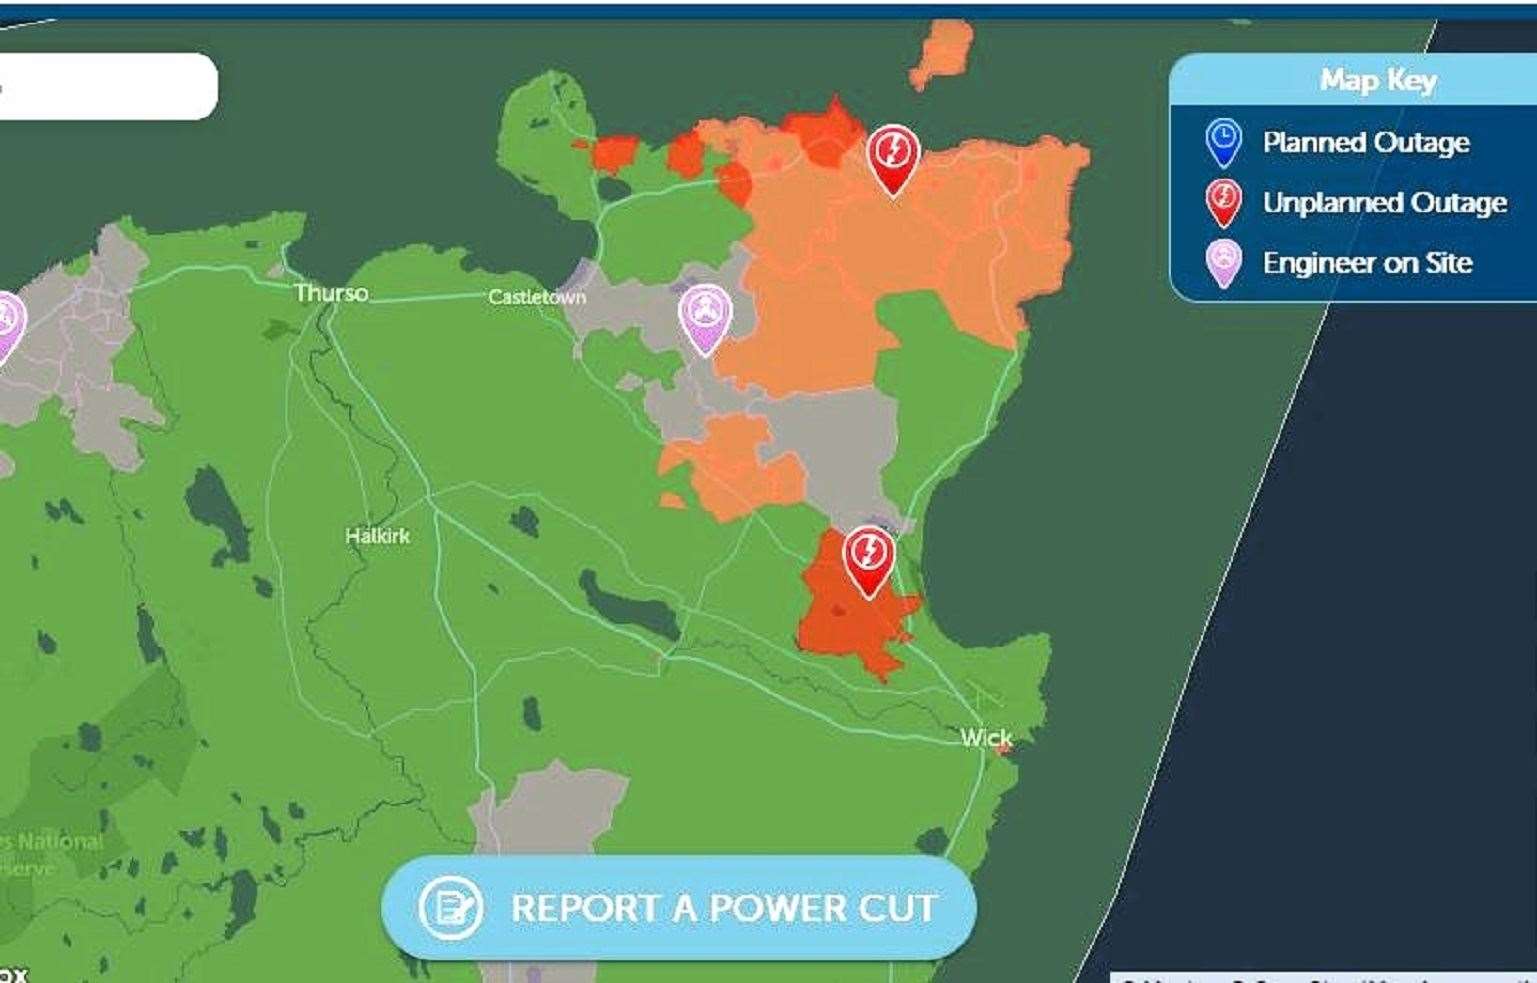 Power outage map from 10am today.